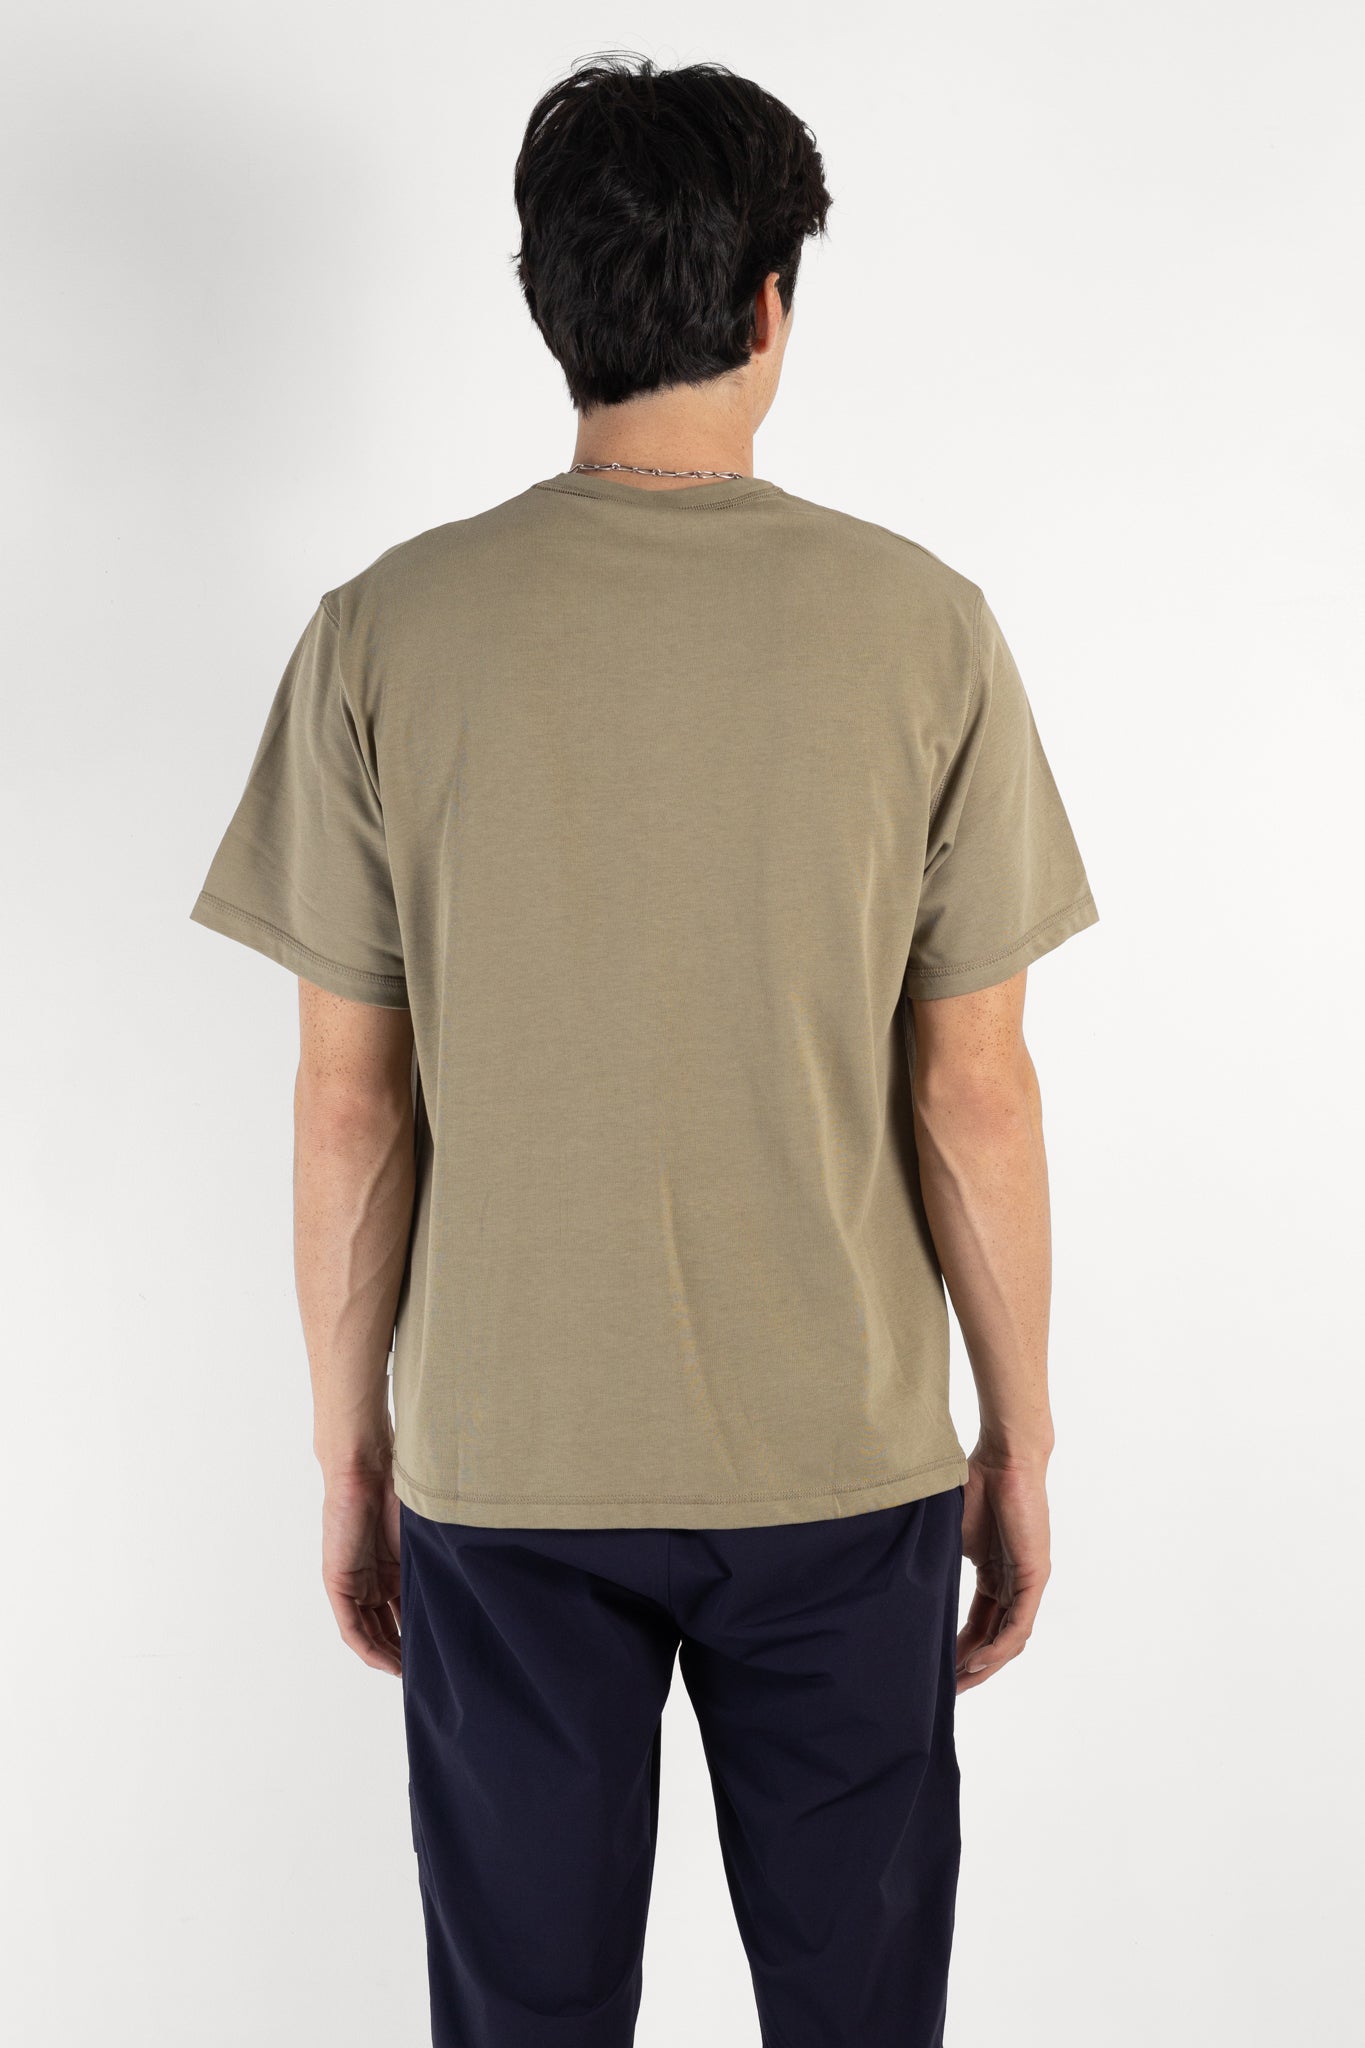 mens tee | Foret Breathe tee | The Standard Store